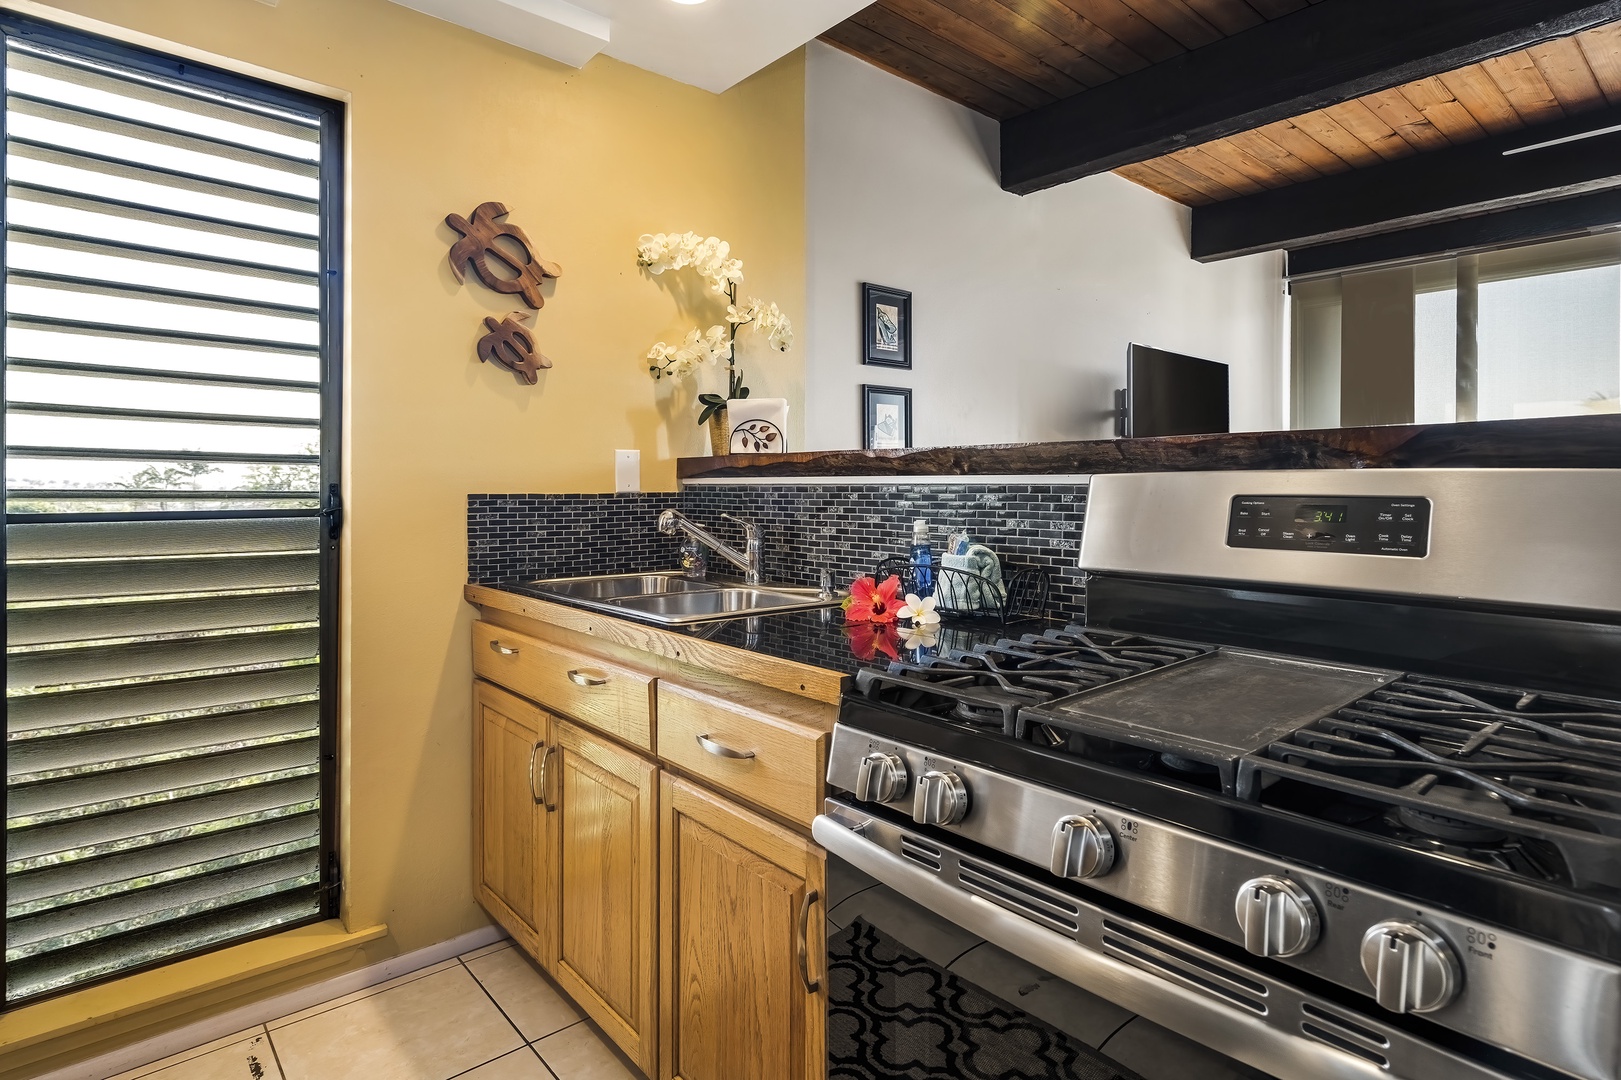 Kailua-Kona Vacation Rentals, Kona Mansions D231 - Gas range for the cooking enthusiasts!